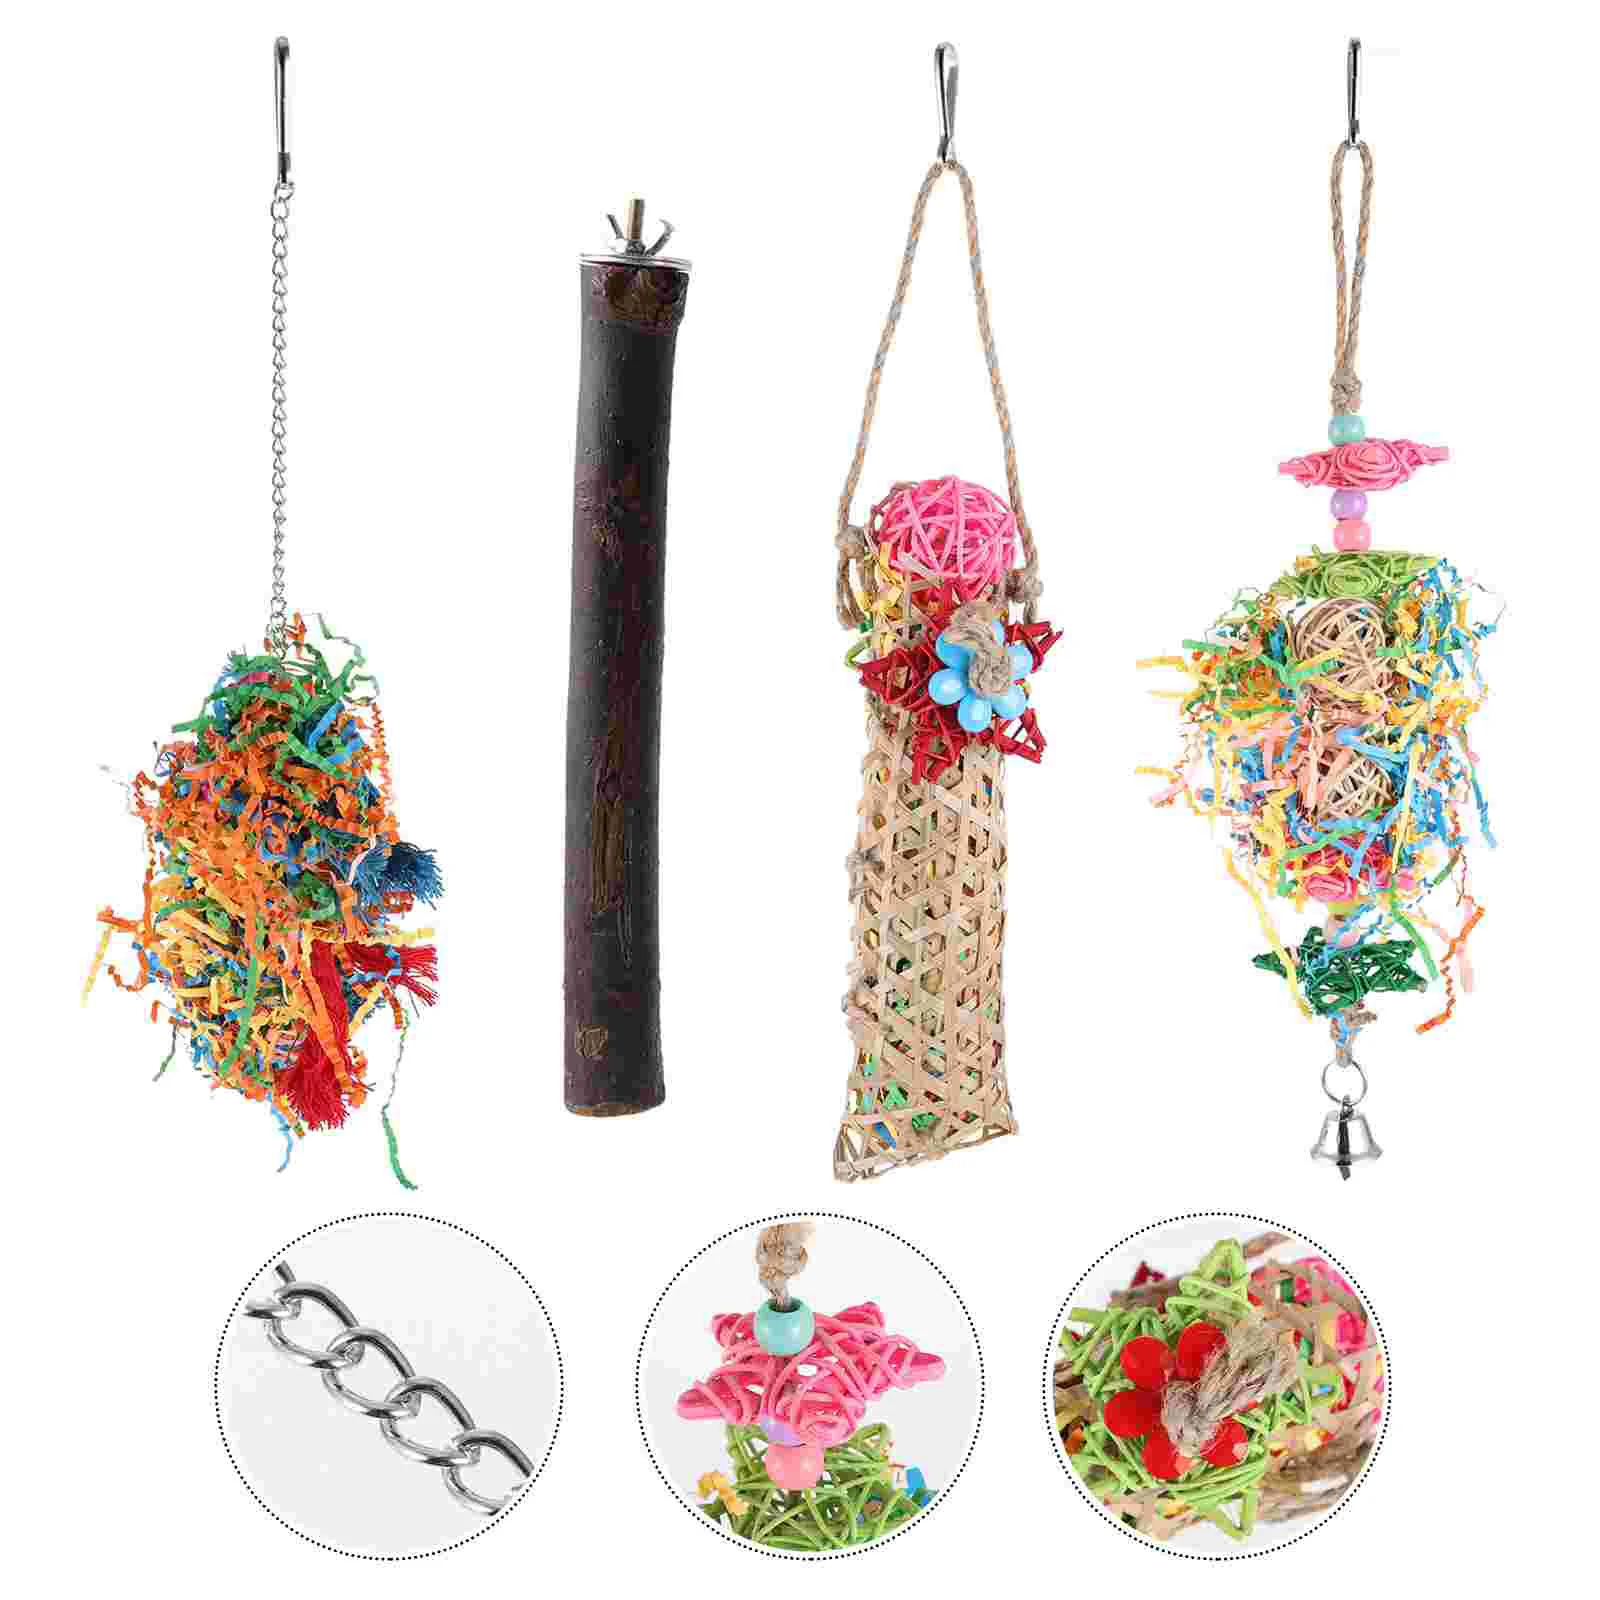 

Toys Bird Toy Parrot Chewing Hanging Cage Shredder Loofah Parakeet Bite Conure Foraging Parakeets Cockatiel Shred Biting Pet